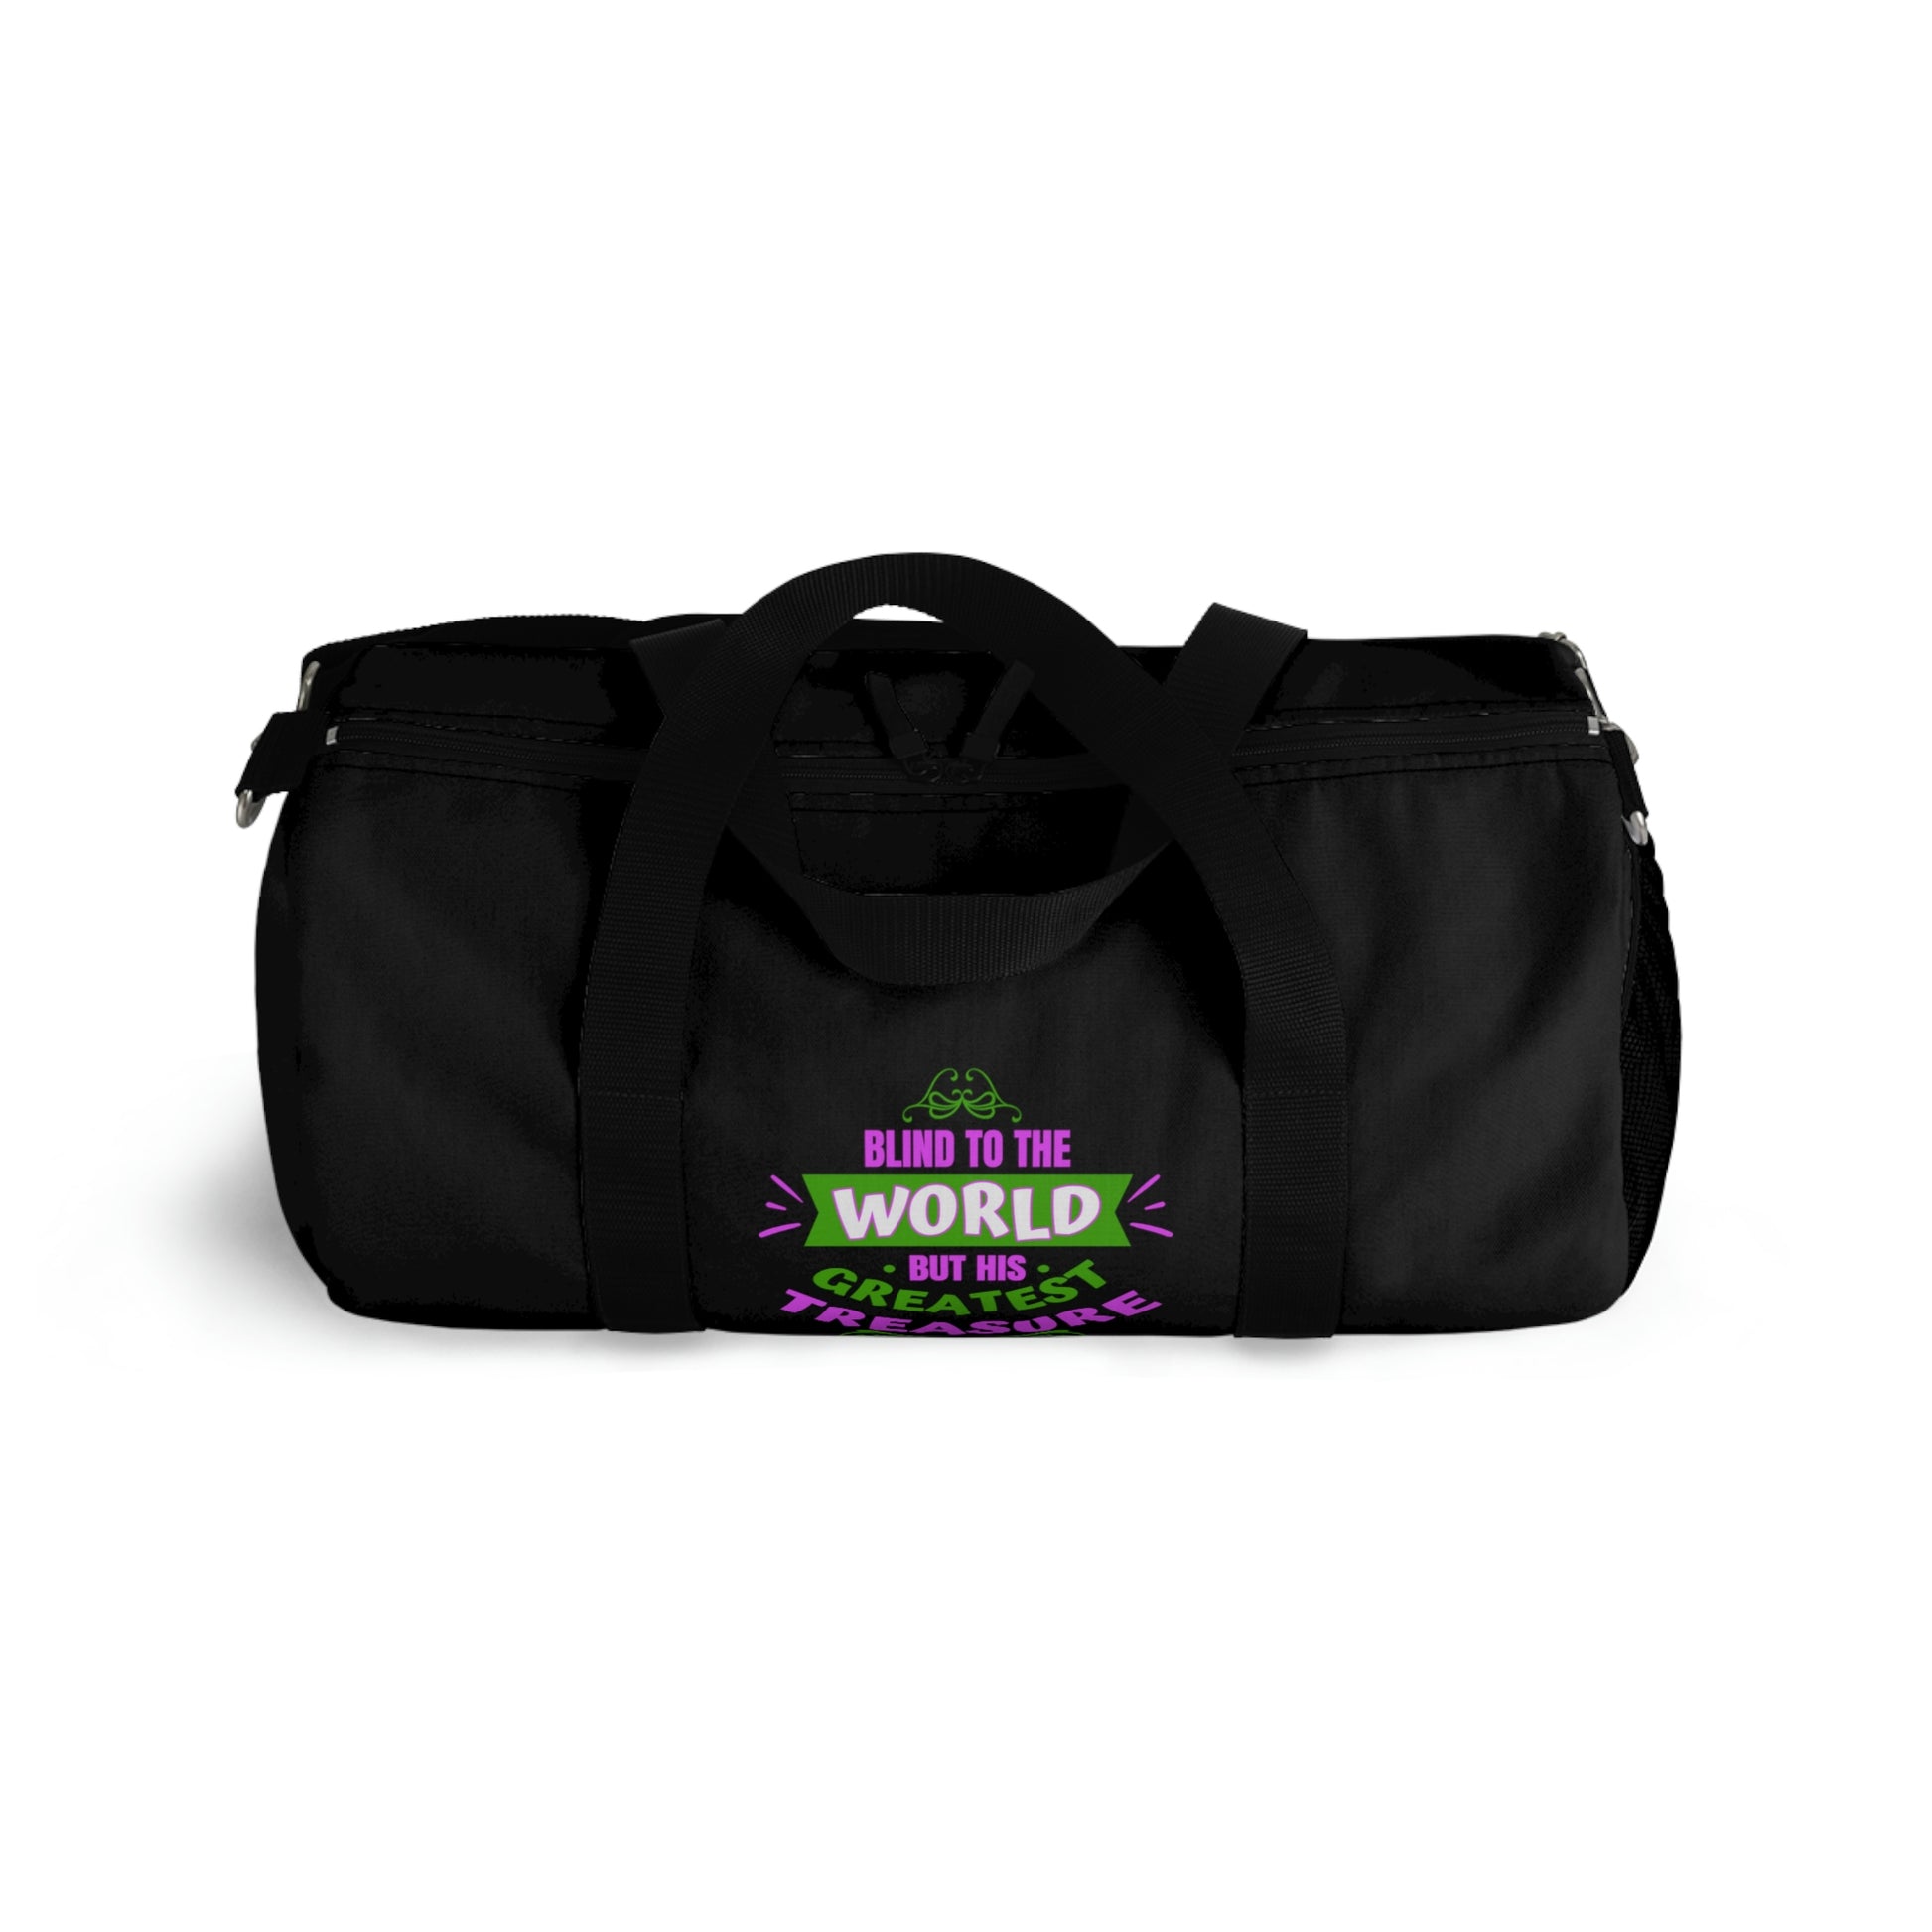 Blind To The World But His Greatest Treasure Duffel Bag Printify